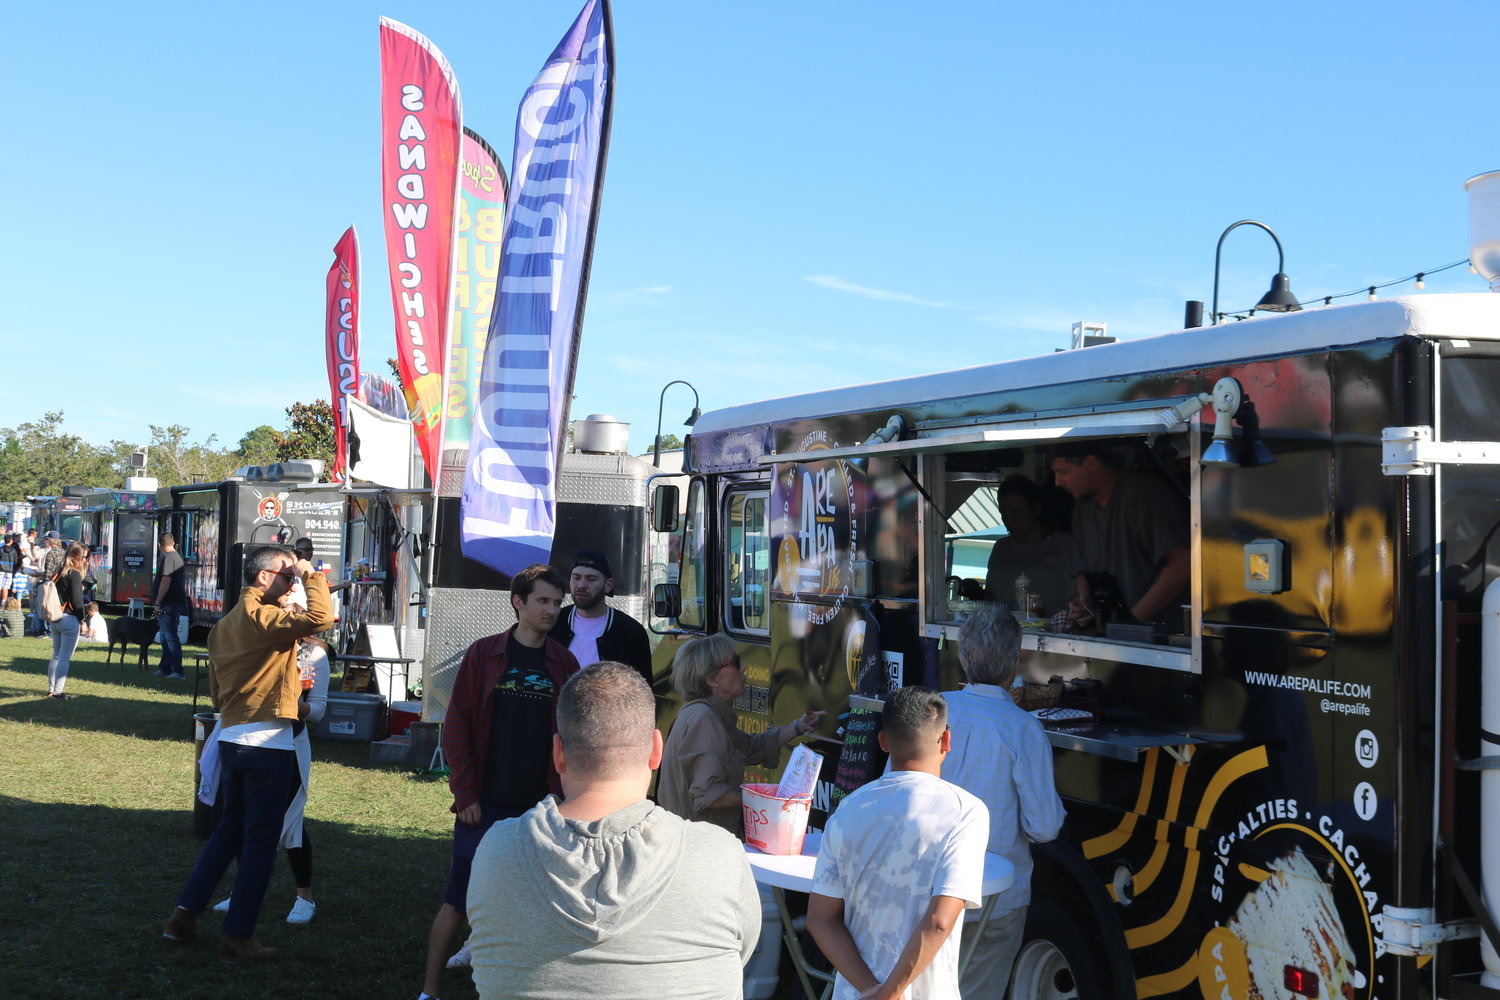 Several food trucks were on hand.